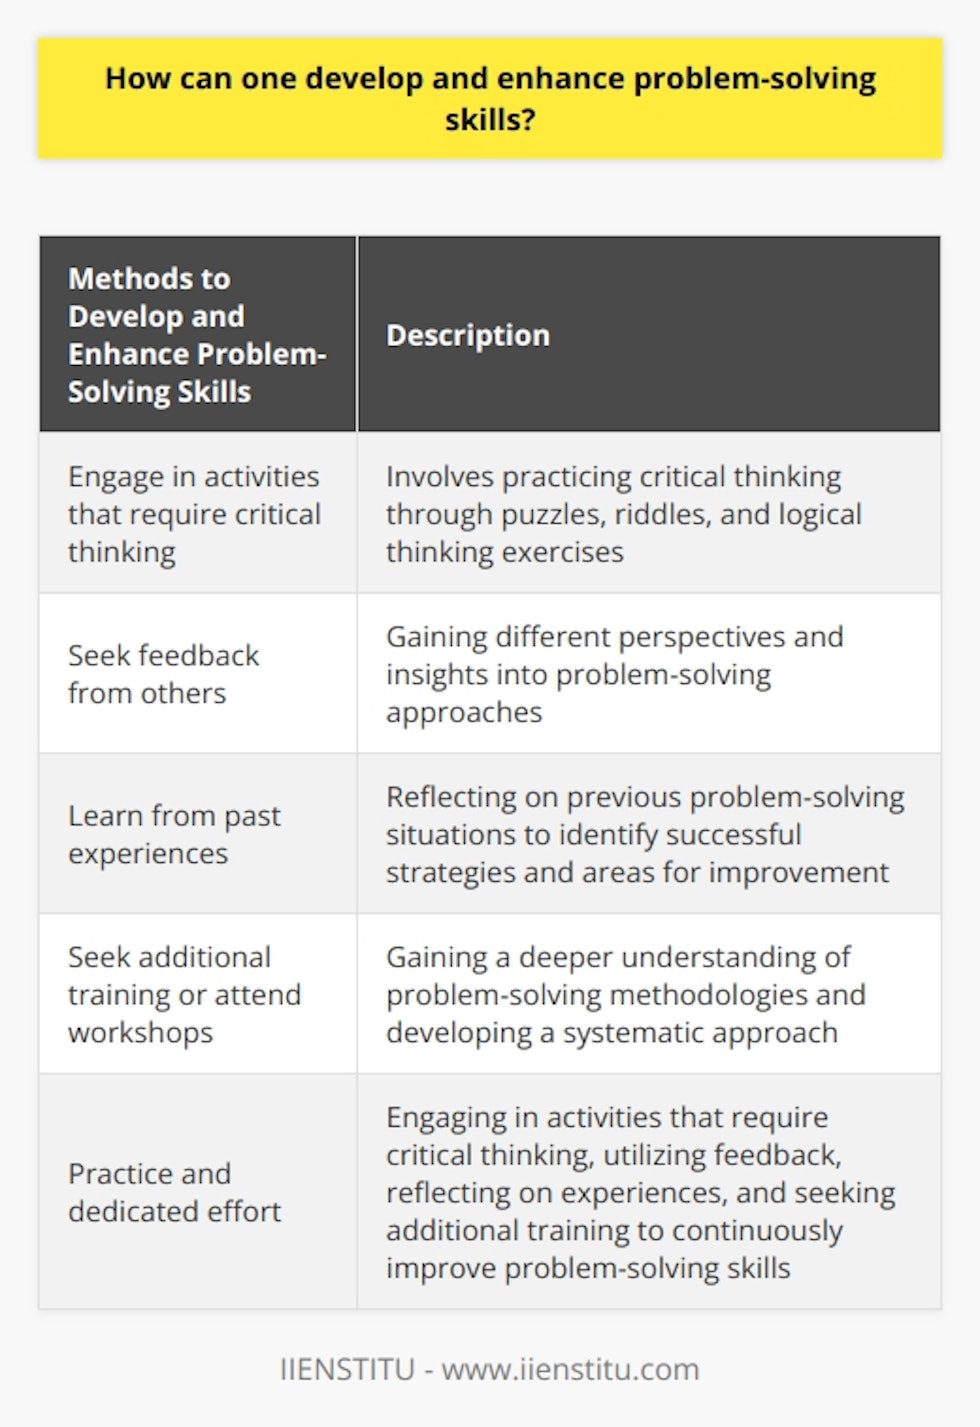 One of the first steps to developing problem-solving skills is to engage in activities that require critical thinking. This can include tasks such as puzzles, riddles, or logical thinking exercises. By engaging in these activities, individuals can practice thinking critically and coming up with innovative solutions to various problems.Seeking feedback is another crucial component in enhancing problem-solving skills. By seeking feedback from others, individuals can gain different perspectives and insights into their problem-solving approaches. This feedback can help identify areas for improvement and provide valuable guidance on how to approach future problem-solving situations more effectively.Learning from past experiences is also essential in developing problem-solving skills. Reflecting on past situations where problem-solving was required can help individuals identify what worked well and what could have been done differently. By understanding what strategies were successful in the past, individuals can apply them to future challenges.Another way to enhance problem-solving skills is by seeking additional training or attending workshops focused specifically on problem-solving techniques. These training sessions can provide individuals with a deeper understanding of various problem-solving methodologies and help them develop a systematic approach to solving problems.In conclusion, problem-solving skills can be developed and enhanced through practice, seeking feedback, learning from past experiences, and seeking additional training. By engaging in activities that require critical thinking, individuals can improve their ability to think innovatively. Utilizing feedback from others and reflecting on past experiences can help identify areas for improvement. Lastly, seeking additional training or attending workshops can provide individuals with a structured approach to problem-solving. With conscious effort and dedication, anyone can improve their problem-solving skills, leading to more effective and efficient solutions.